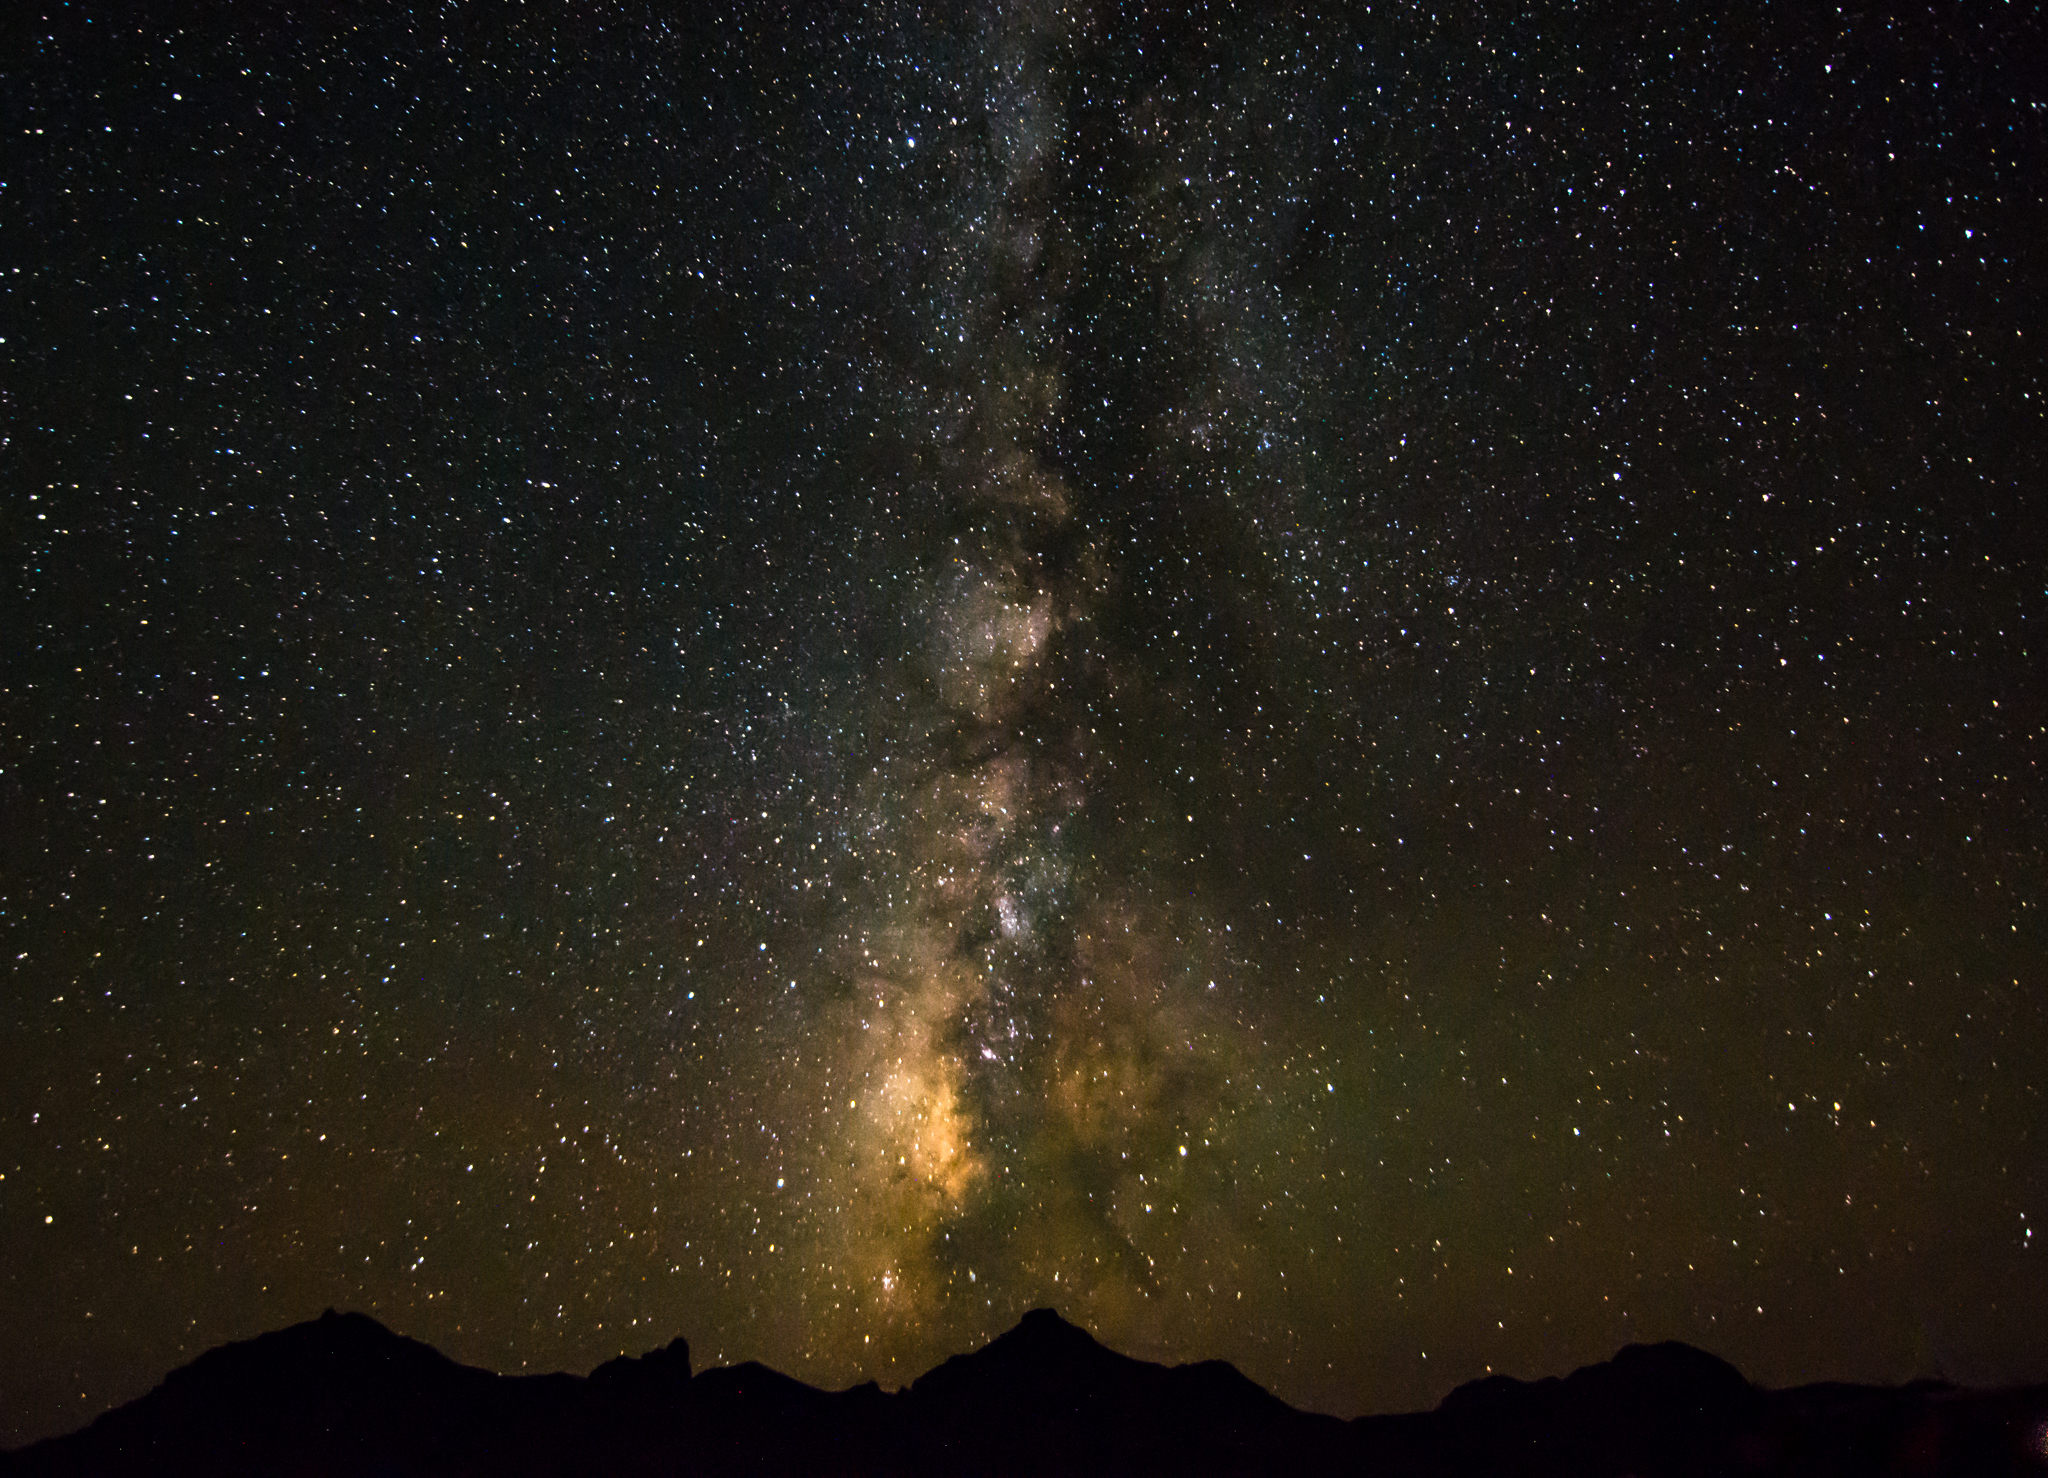 The glow of the Milky Way backlights the silhouette of a mountain range.